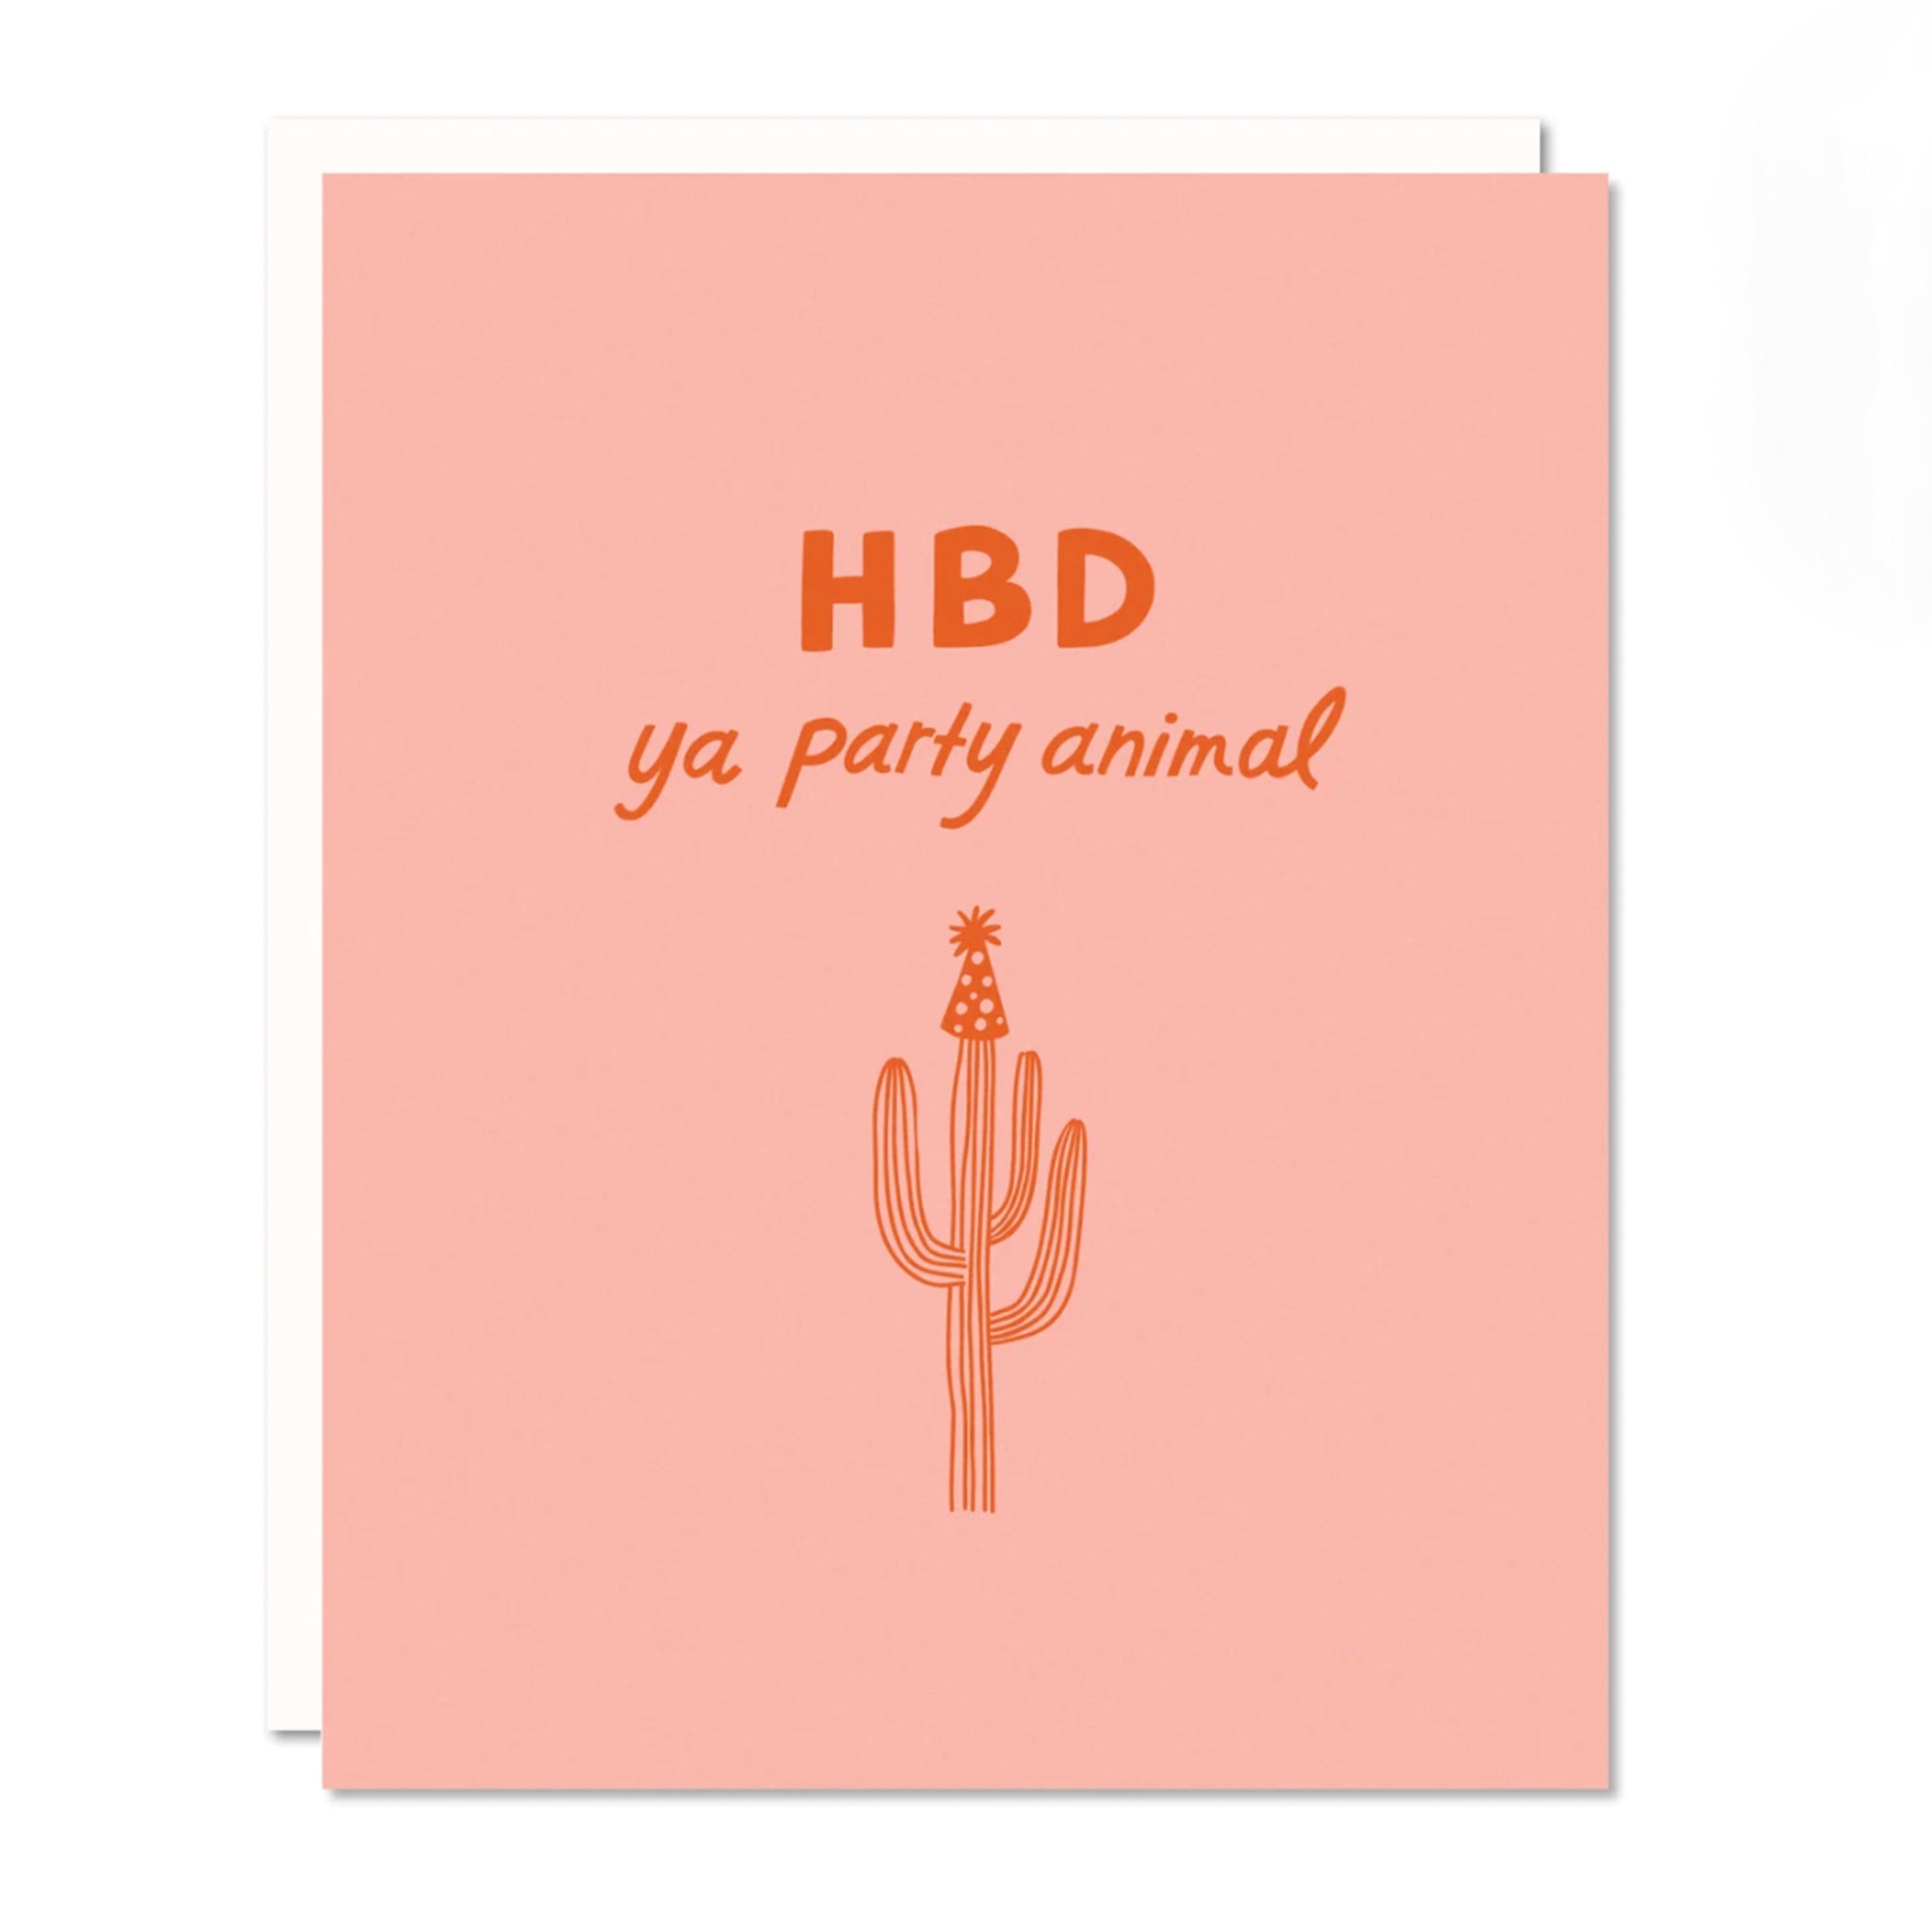 On a white background is a pink card with a red line drawing on of a cactus wearing a party hat and text above it that reads, "HBD ya party animal". 